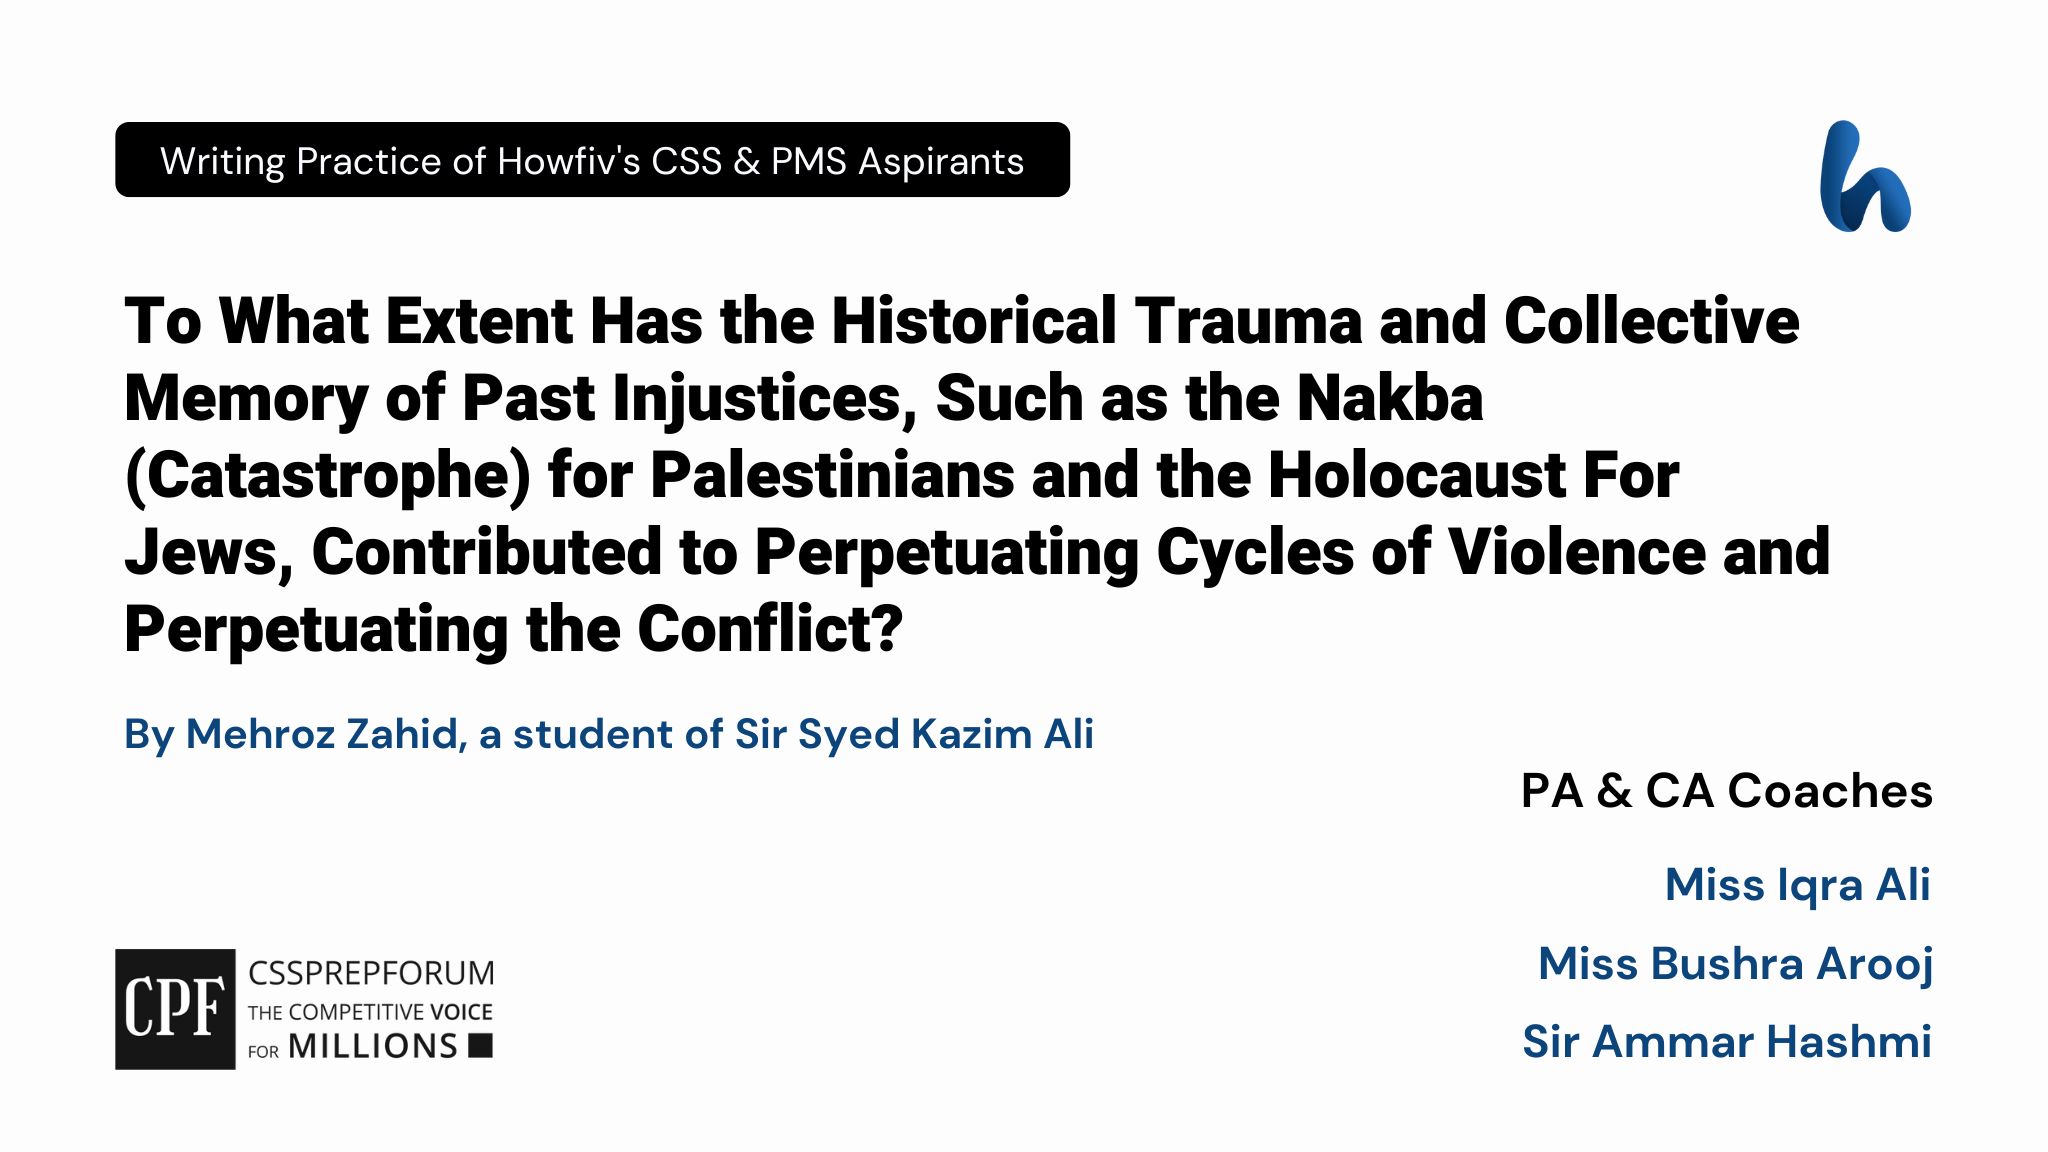 CSS Current Affairs Article | Role of Historical Trauma in Perpetuating the Palestine Conflict | is Written by Mehroz Zahid Under the Supervision of Ammar Hashmi...